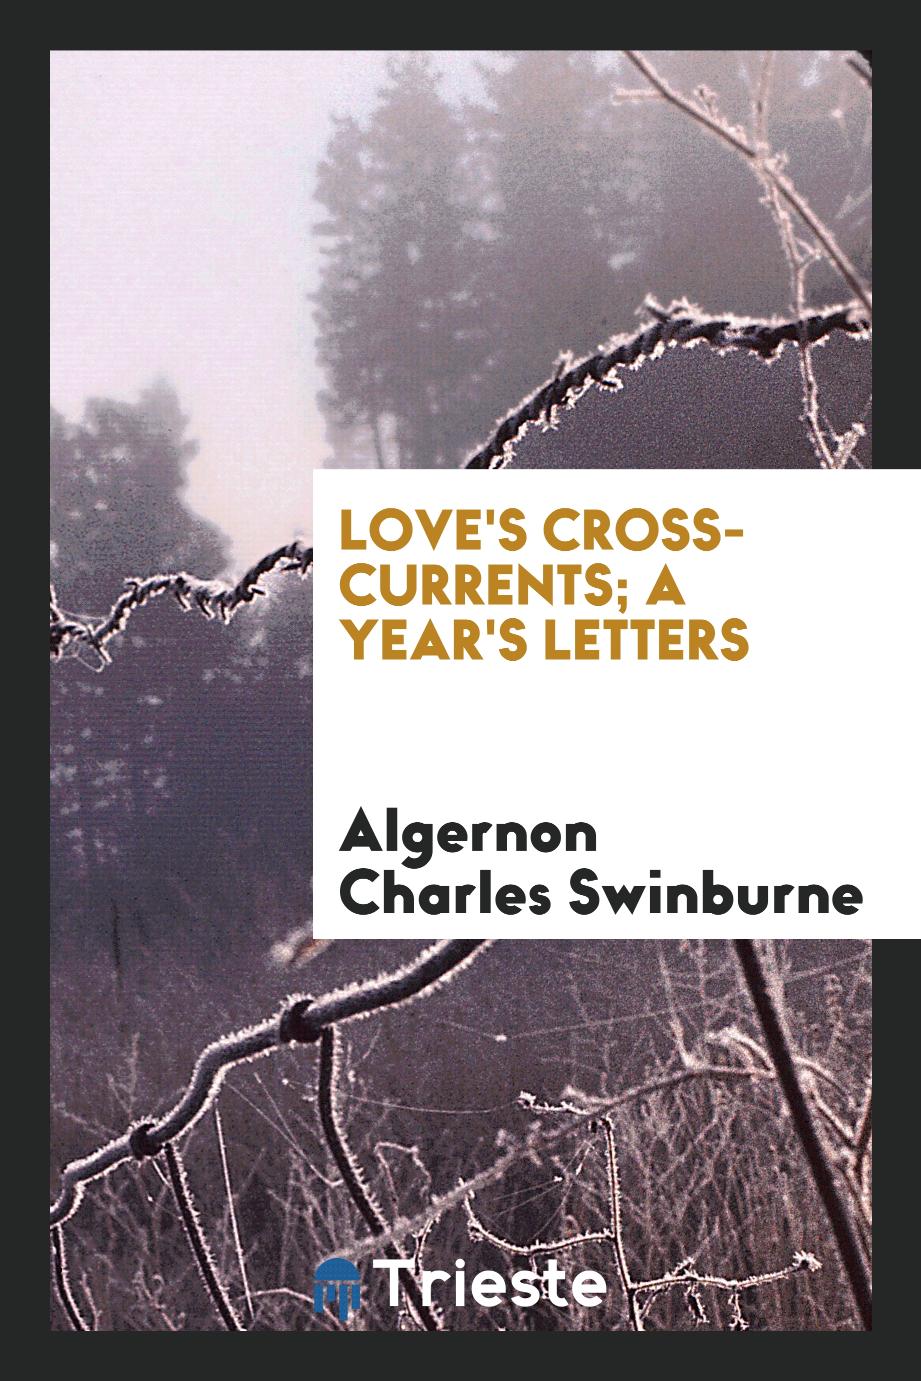 Love's cross-currents; a year's letters